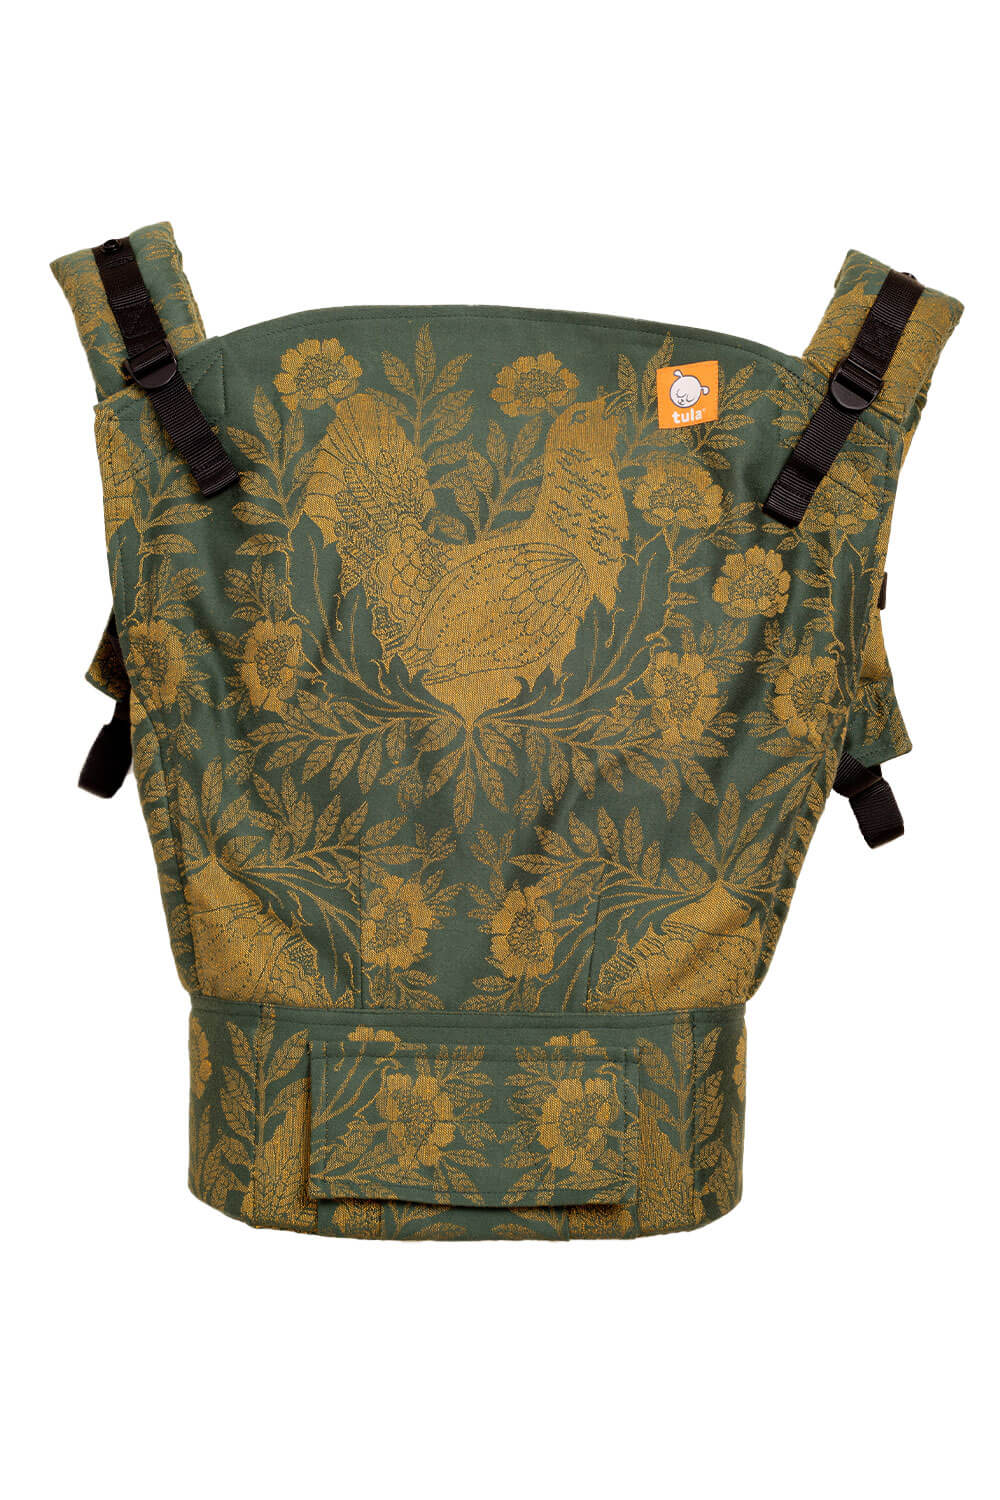 Capercaillie Pinewood - Signature Woven Toddler Carrier